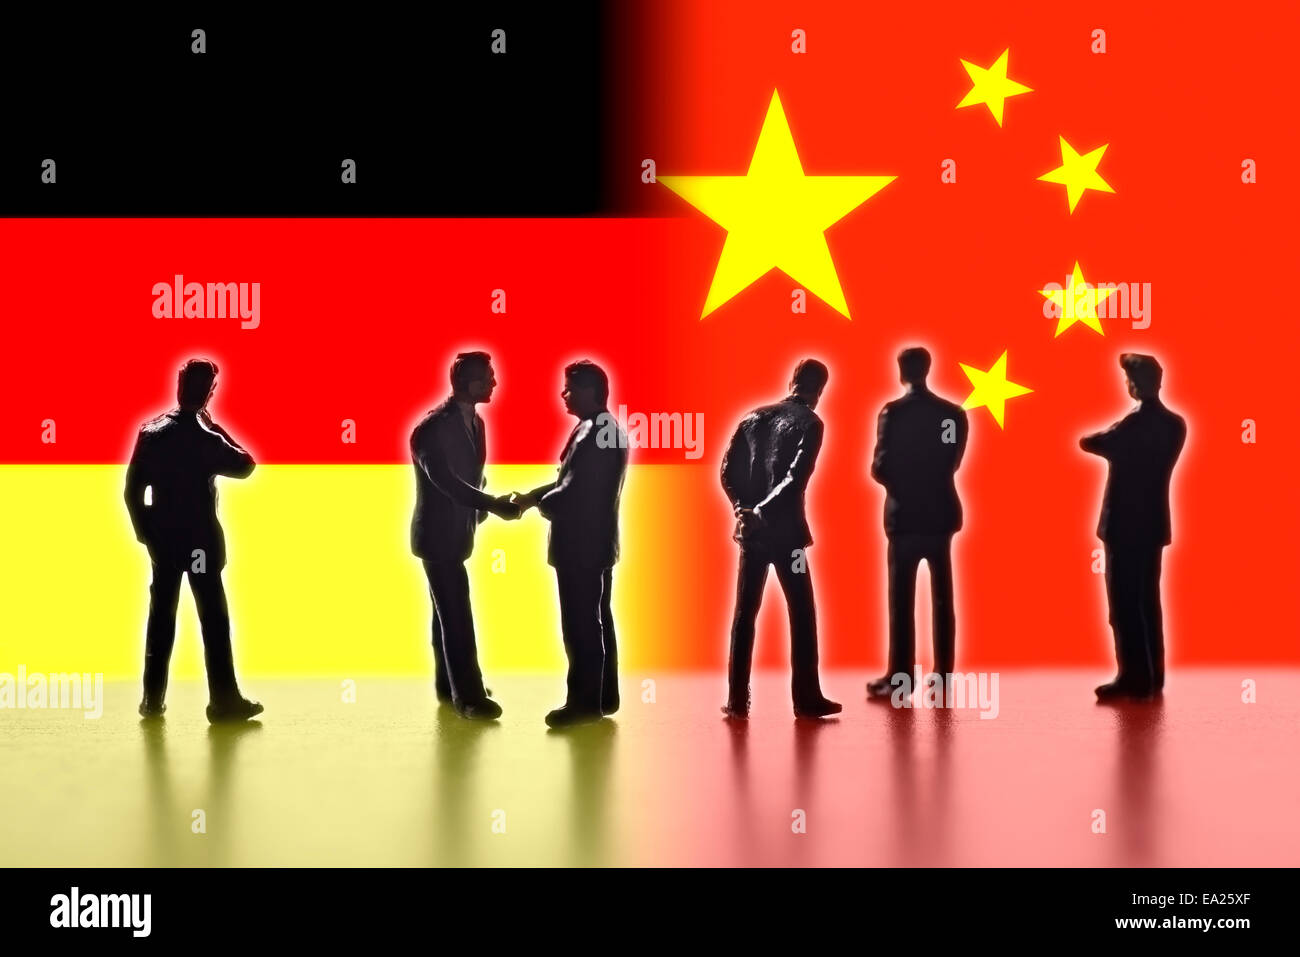 Model figures symbolizing politicians are facing the flags of China and Germany. Two of them shake hands. Stock Photo